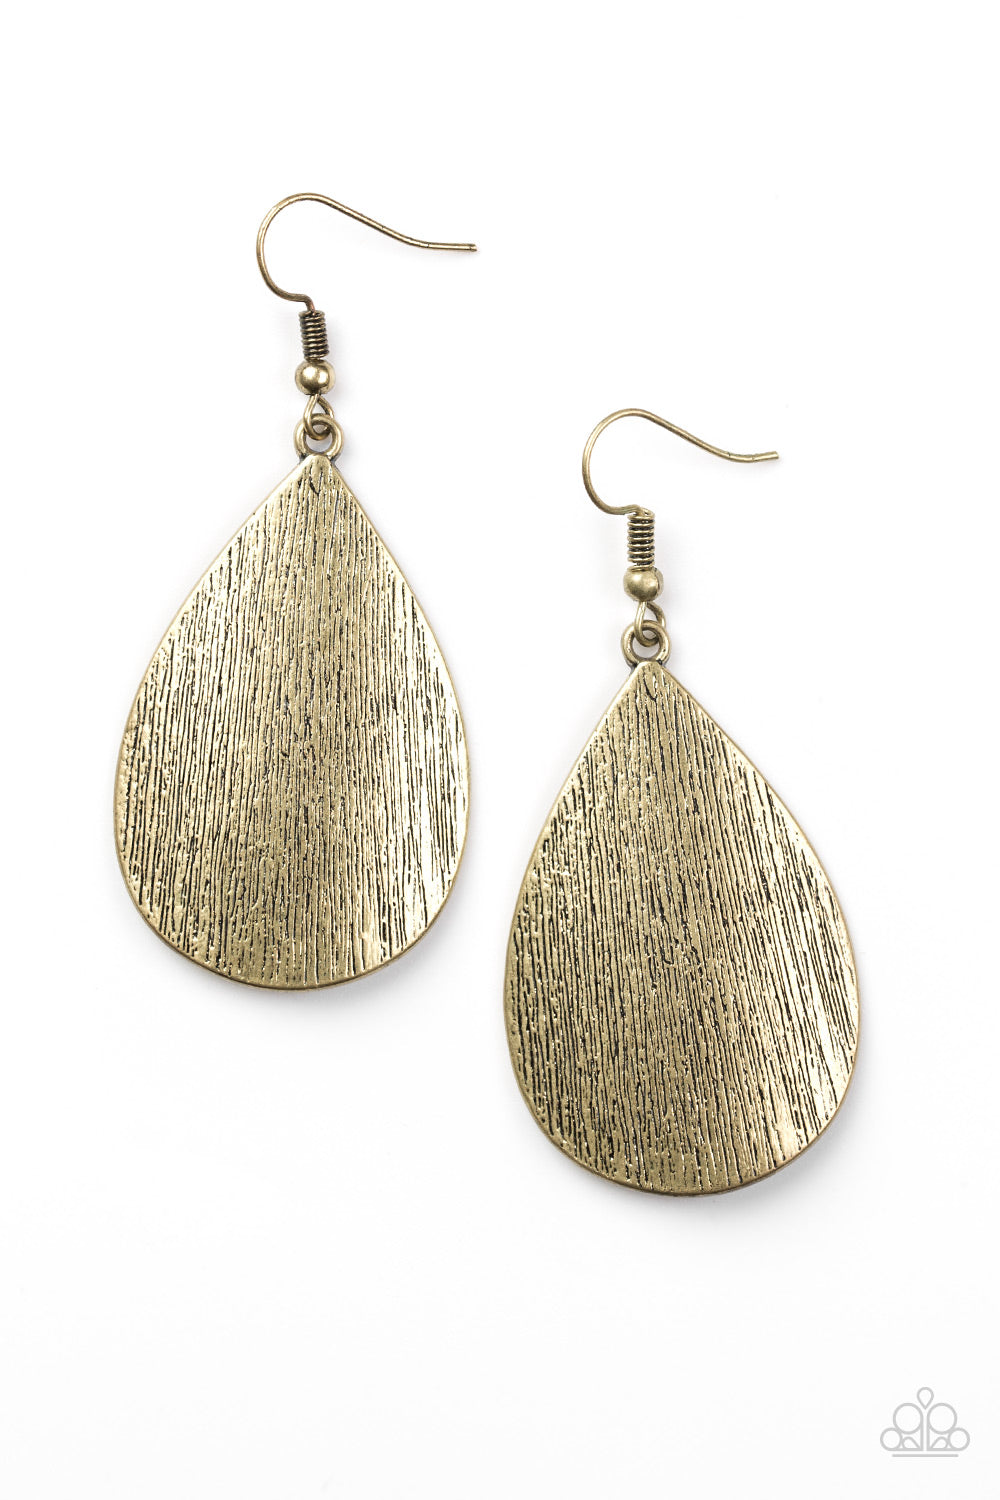 Paparazzi Accessories All Allure - Brass Earrings 